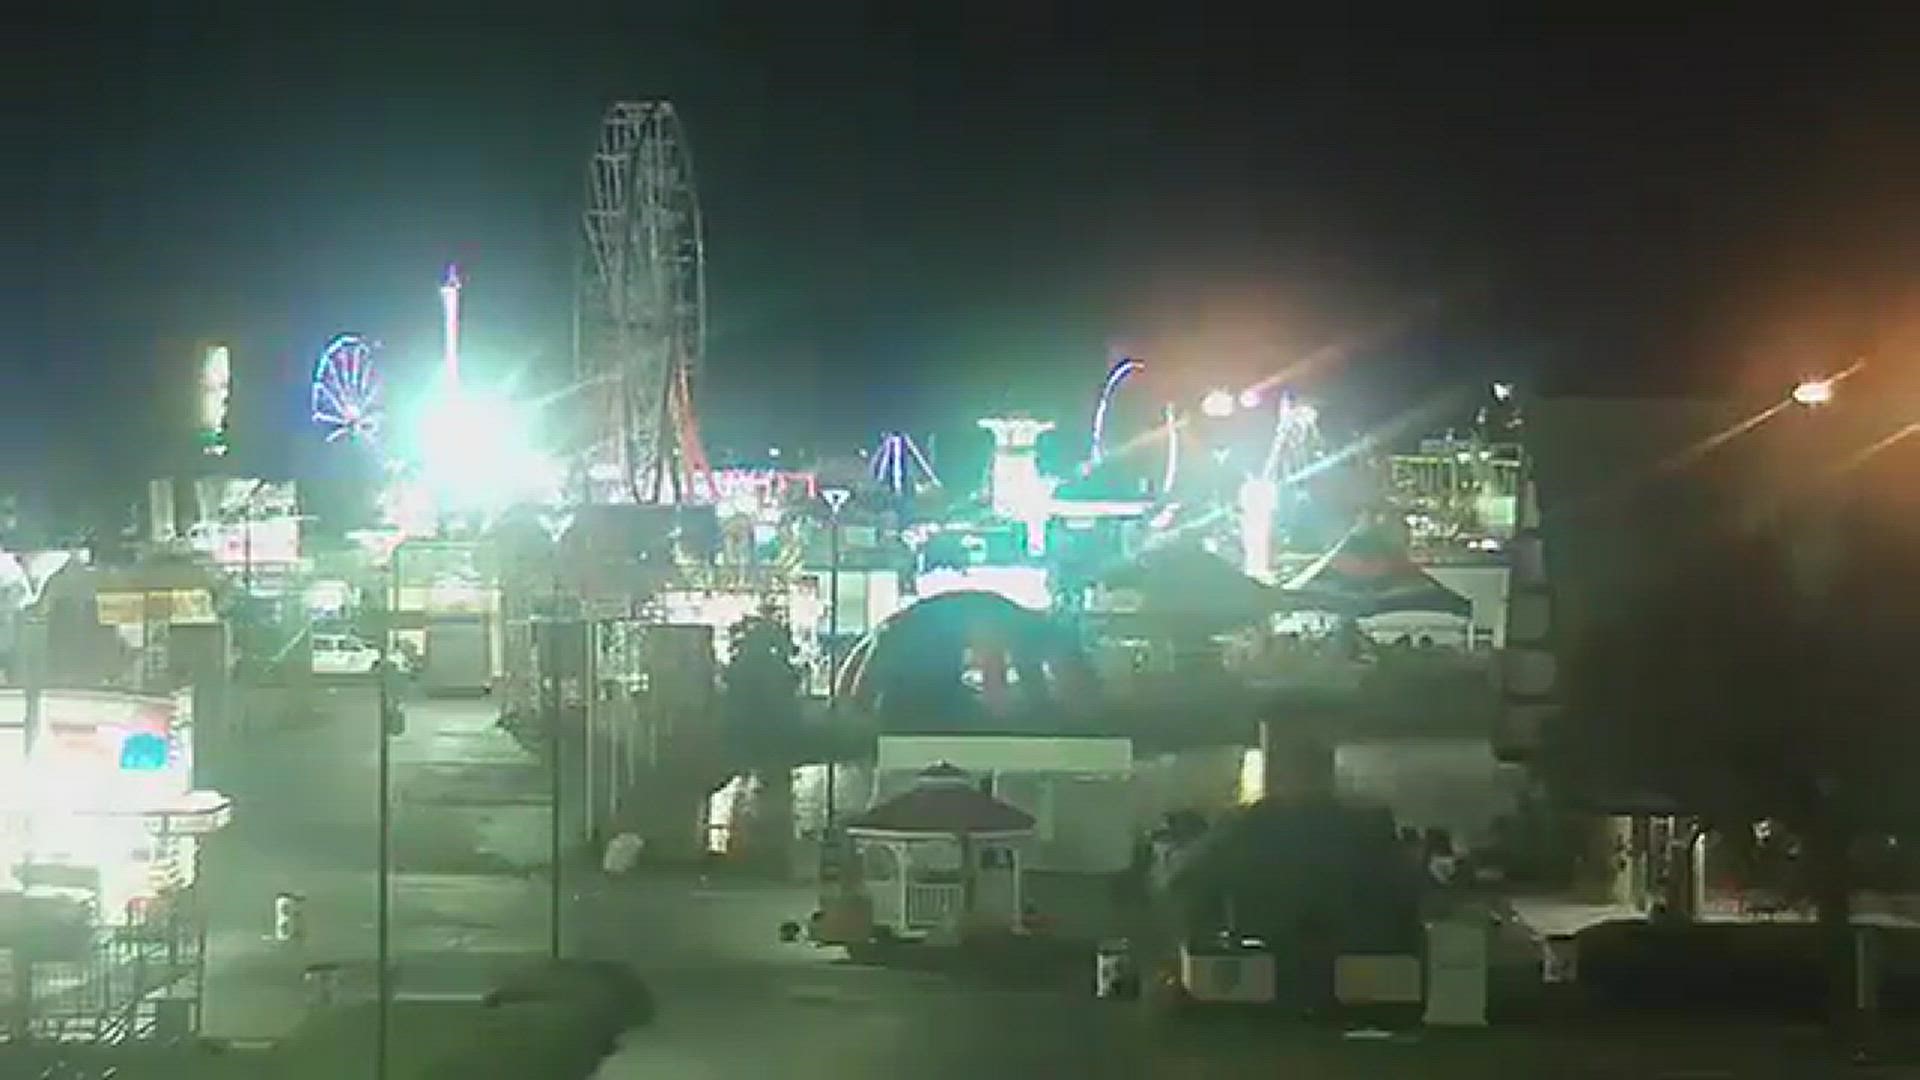 The Georgia National Fair came to a close Sunday night. Watch a time-lapse of personnel taking down the setup.